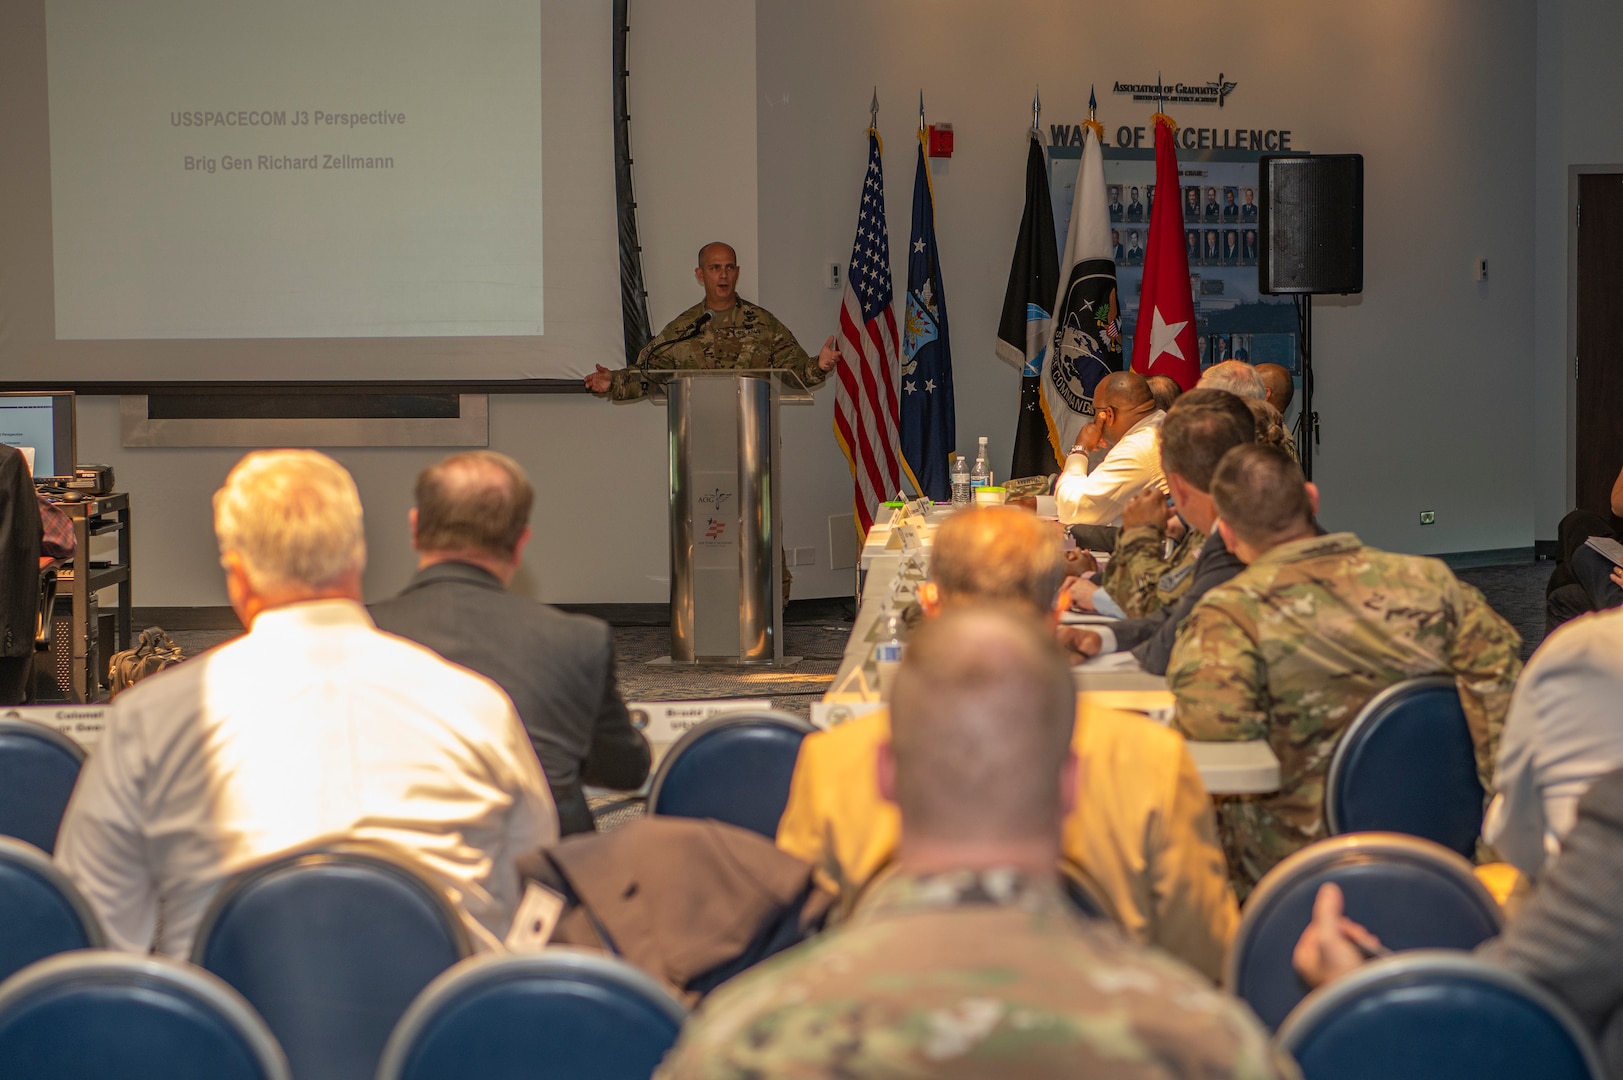 U.S. Space Command hosted the 14th Annual Satellite Communication Working Group